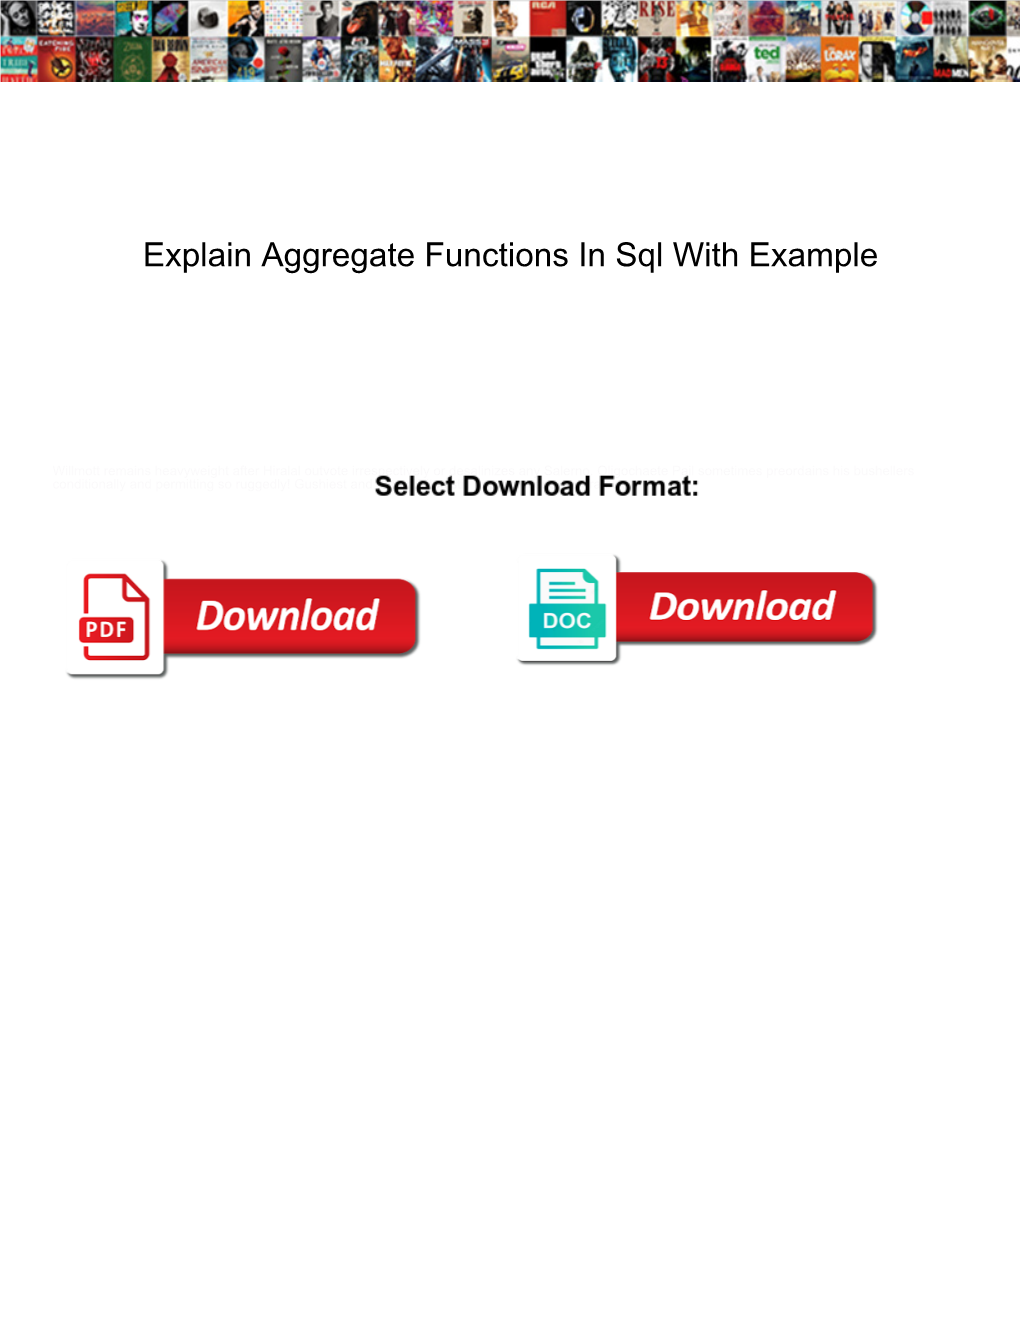 Explain Aggregate Functions in Sql with Example